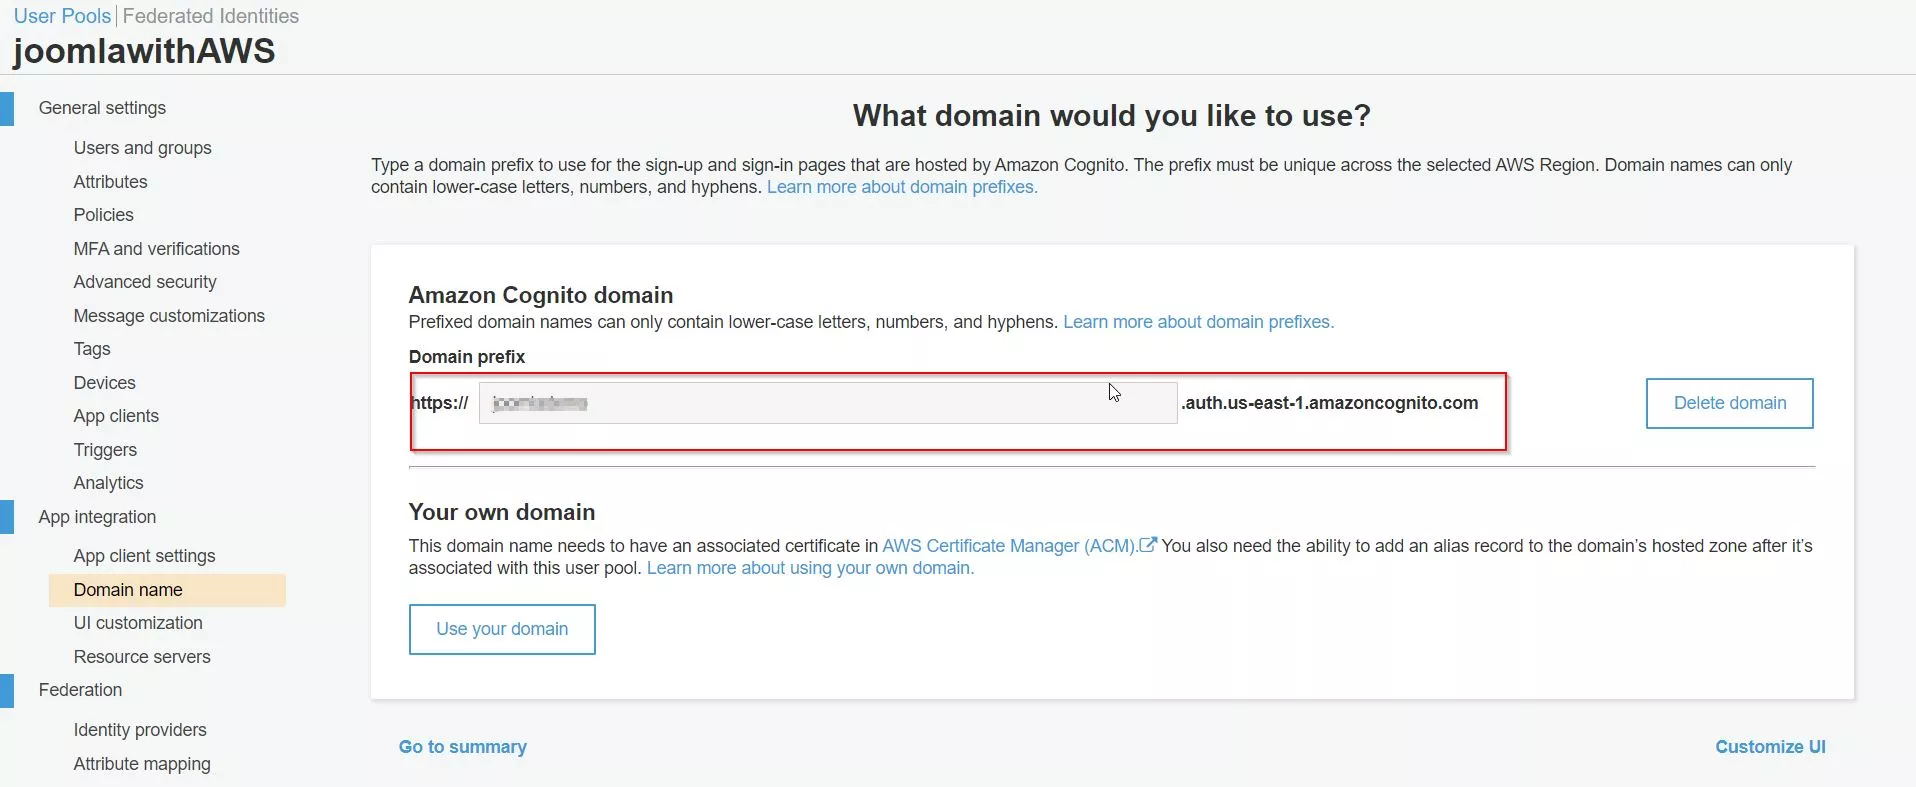 SAML SSO with AWS Cognito as SP and Joomla as IDP, Manage User Pools